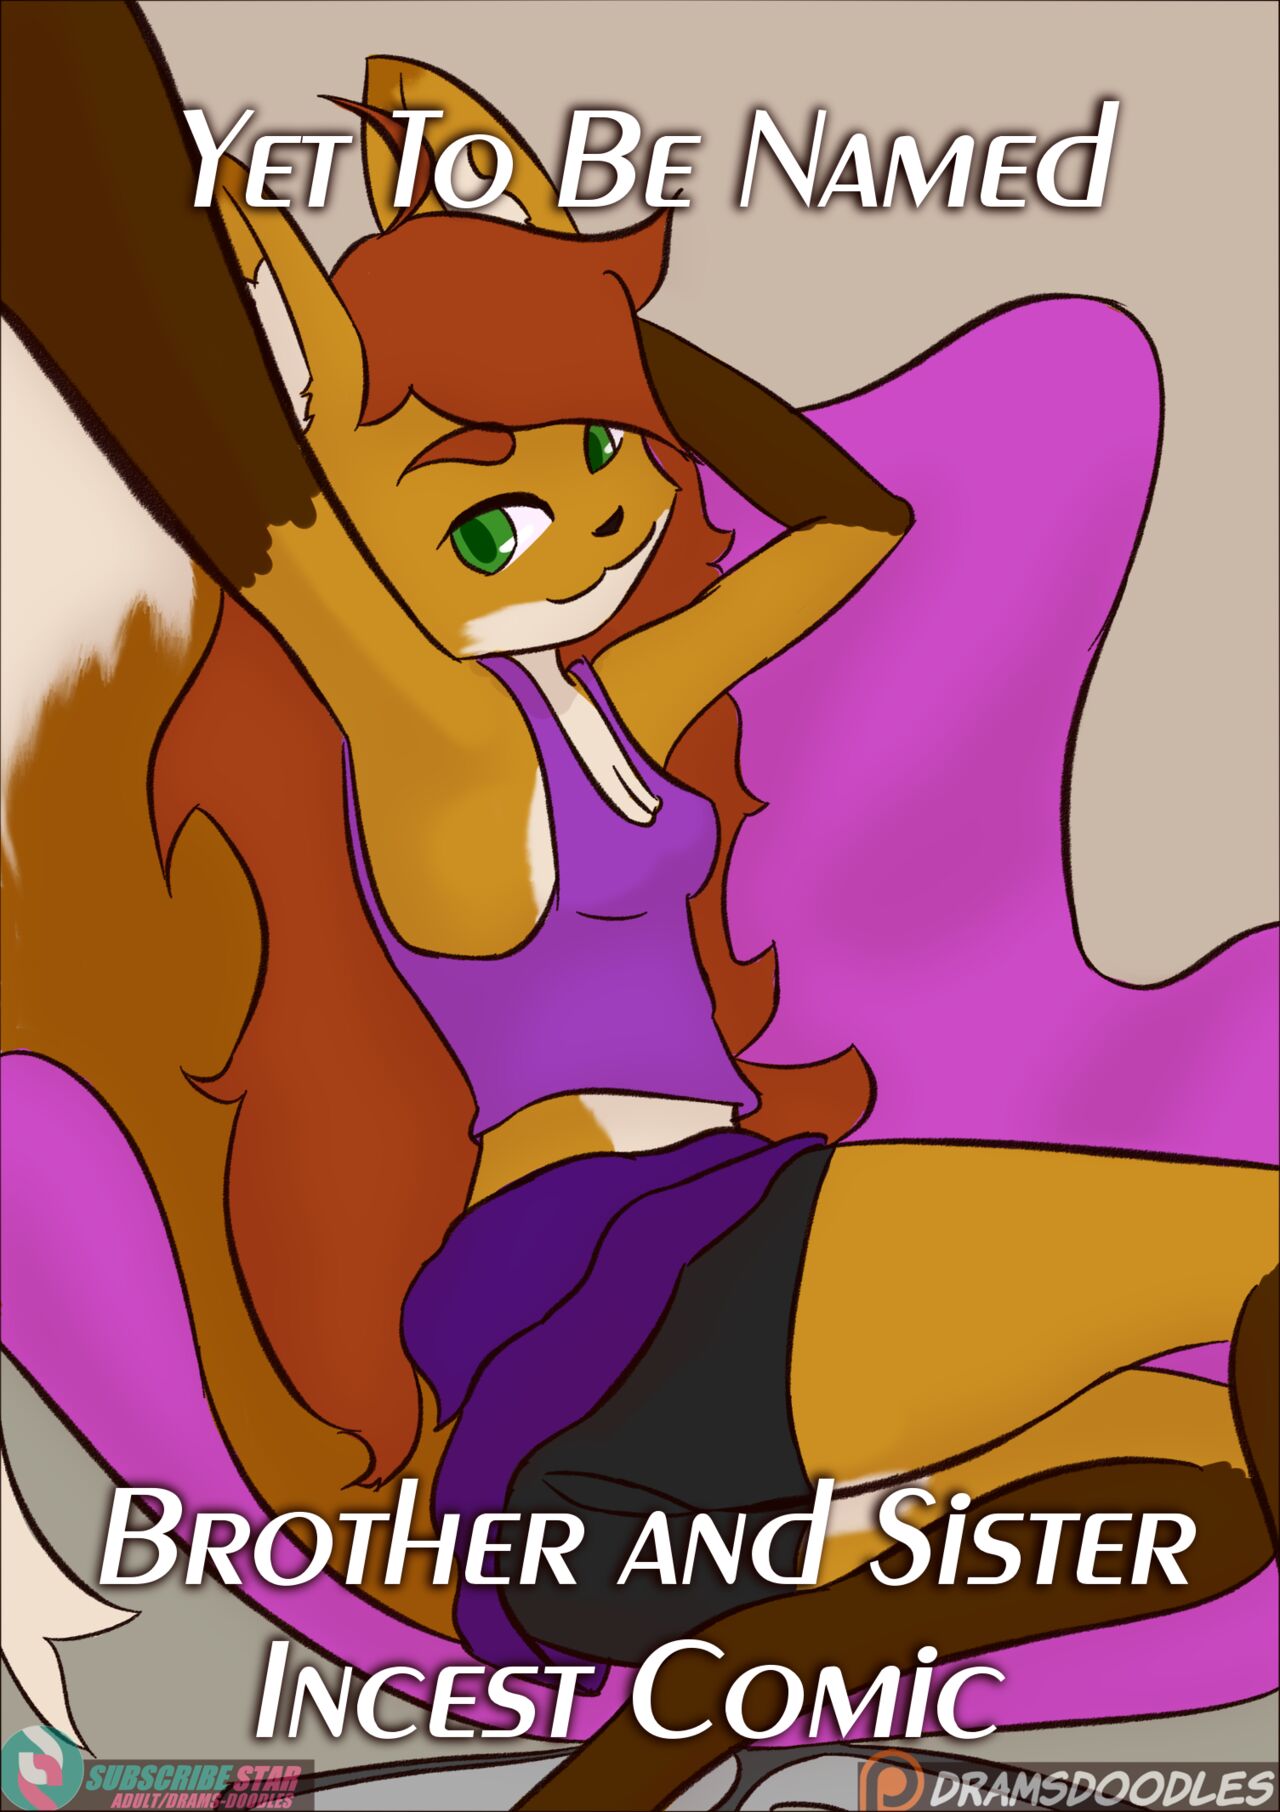 Brother Sister Porn Comics - Yet to be named Brother and Sister Incest Comic - KingComiX.com